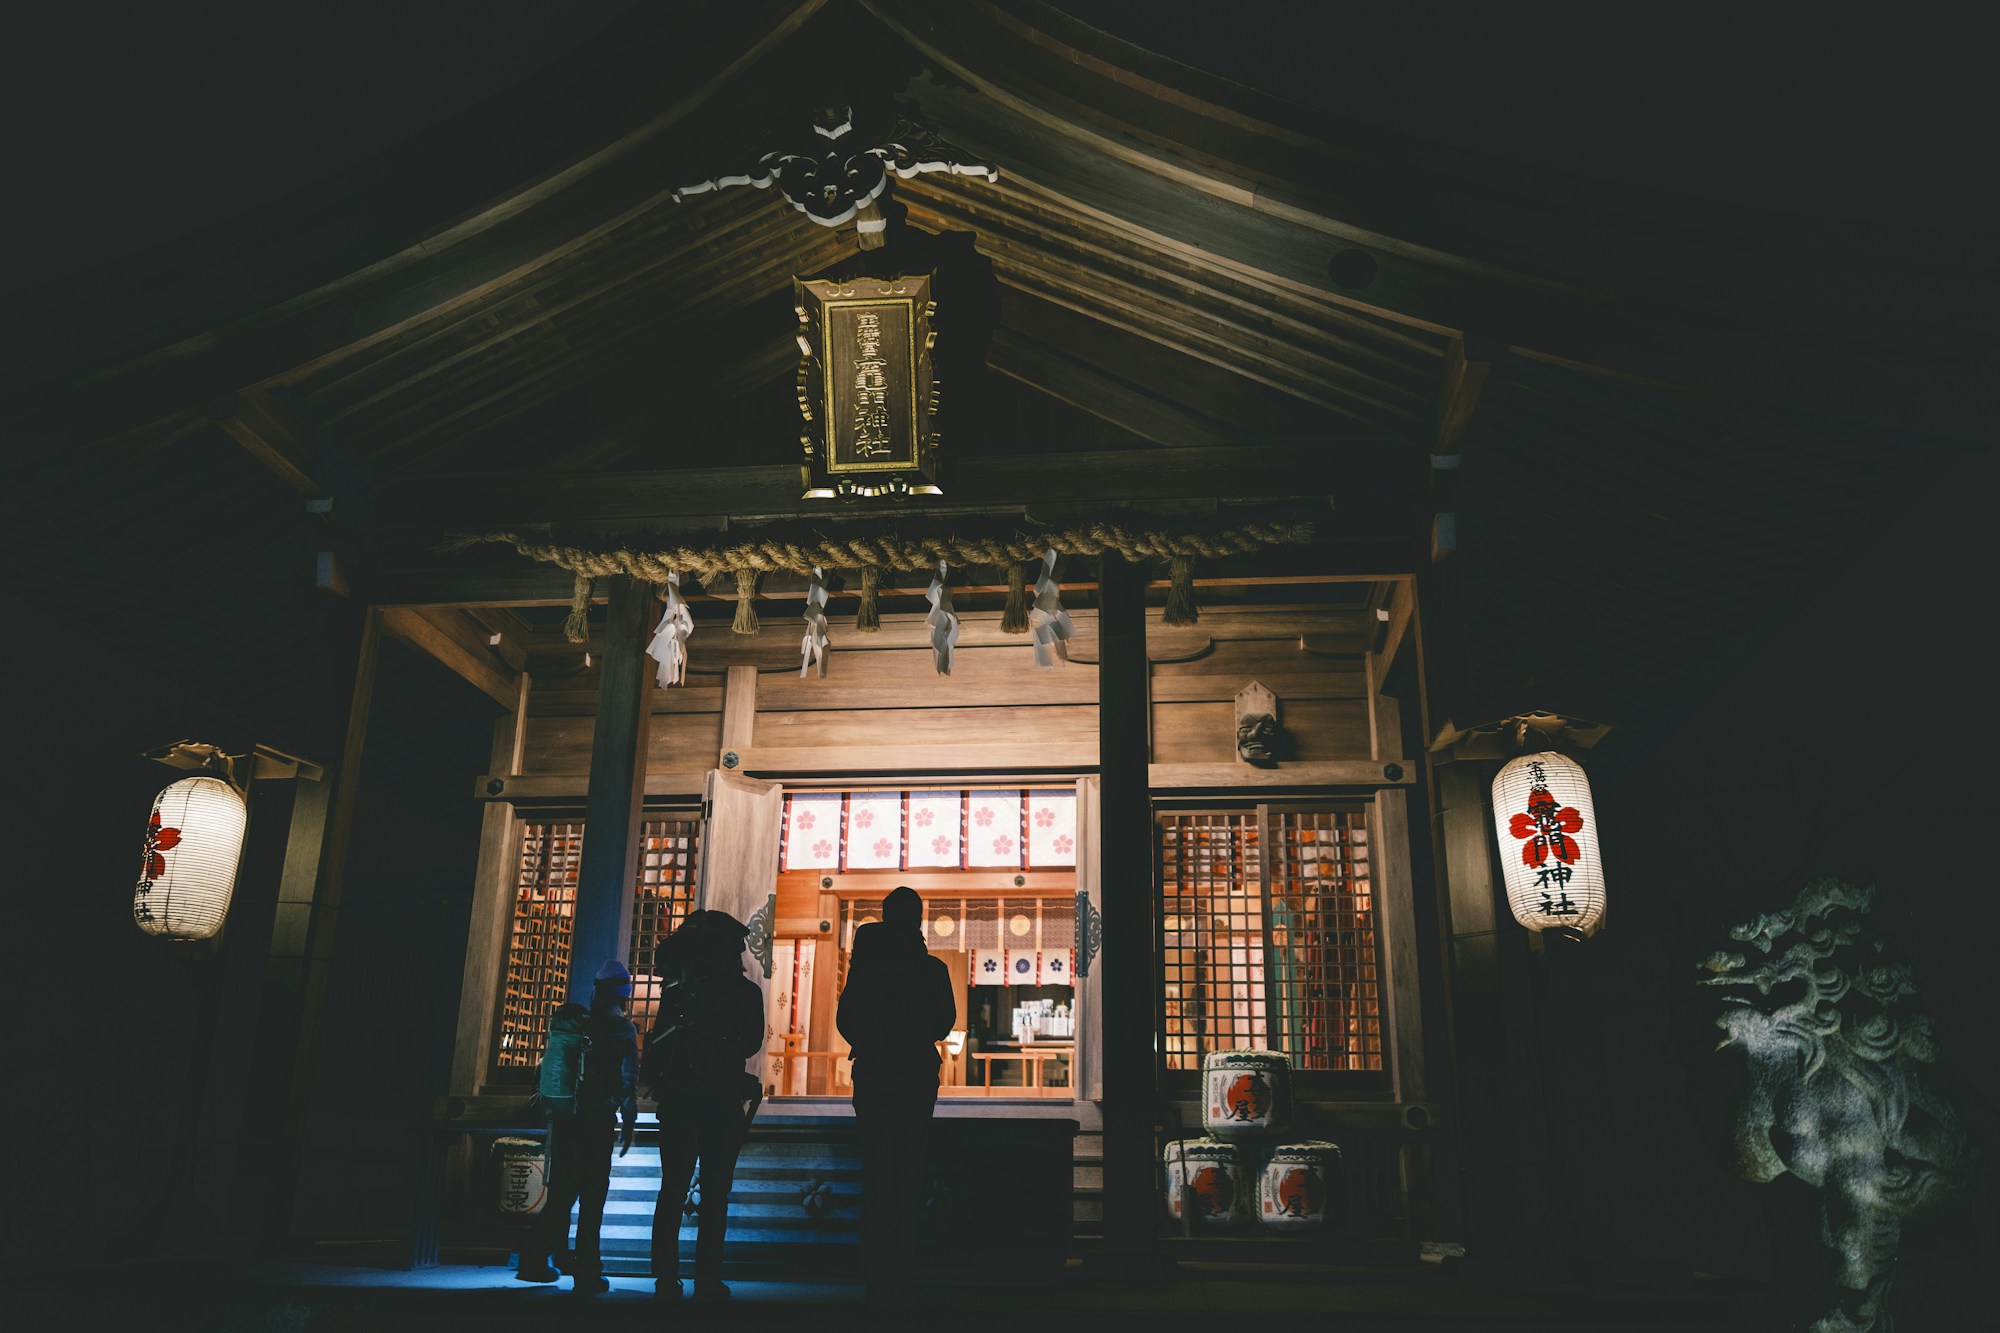 Dazaifu: Ideal Months to Explore Weather and Seasons